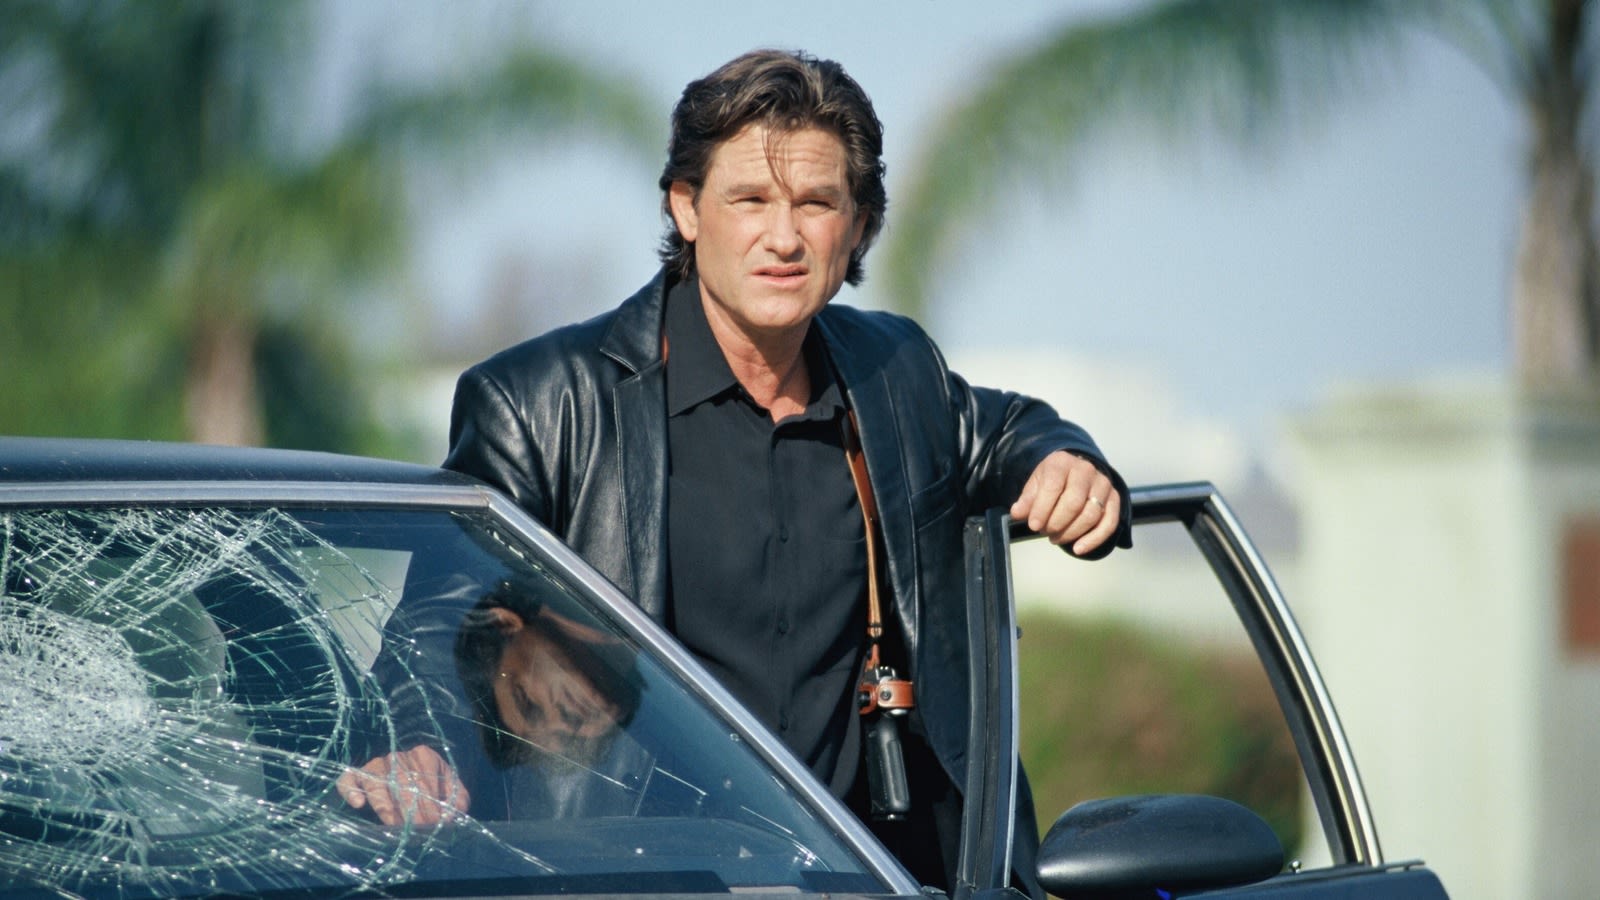 Kurt Russell's Dark Blue Character Deviated From The Actor's Typical Forte - SlashFilm